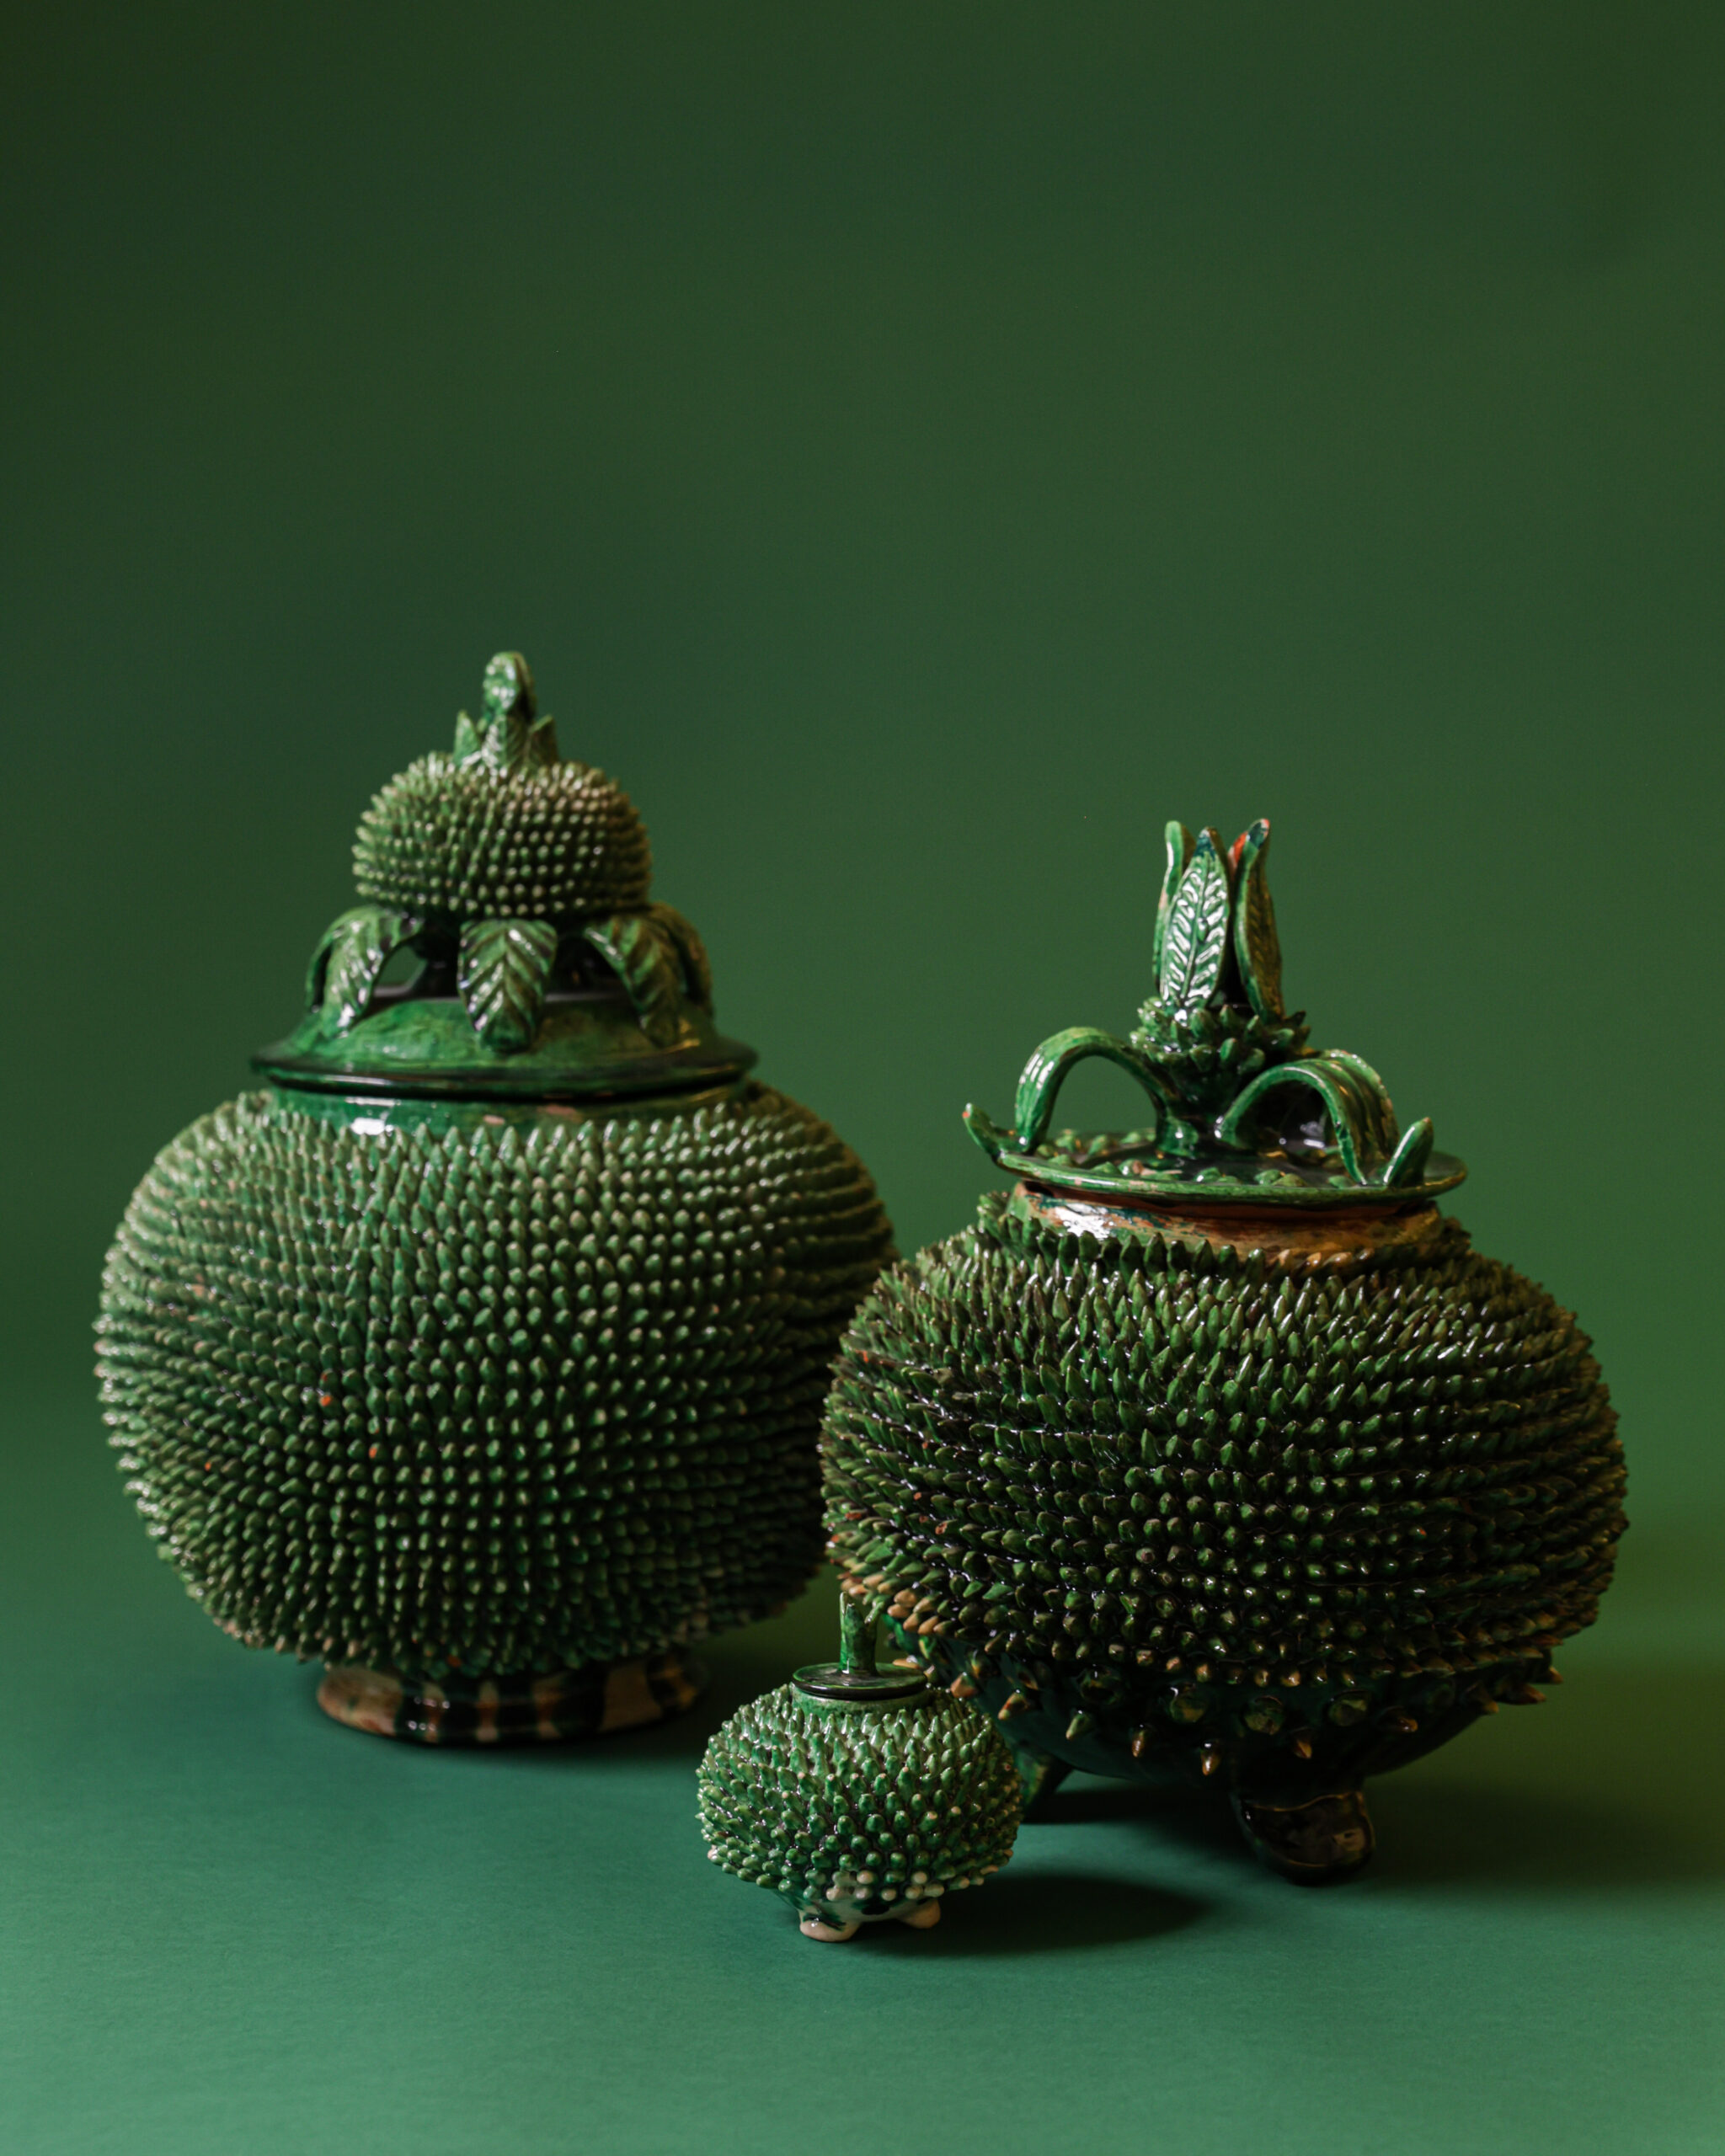 The celebrated pineapple pots